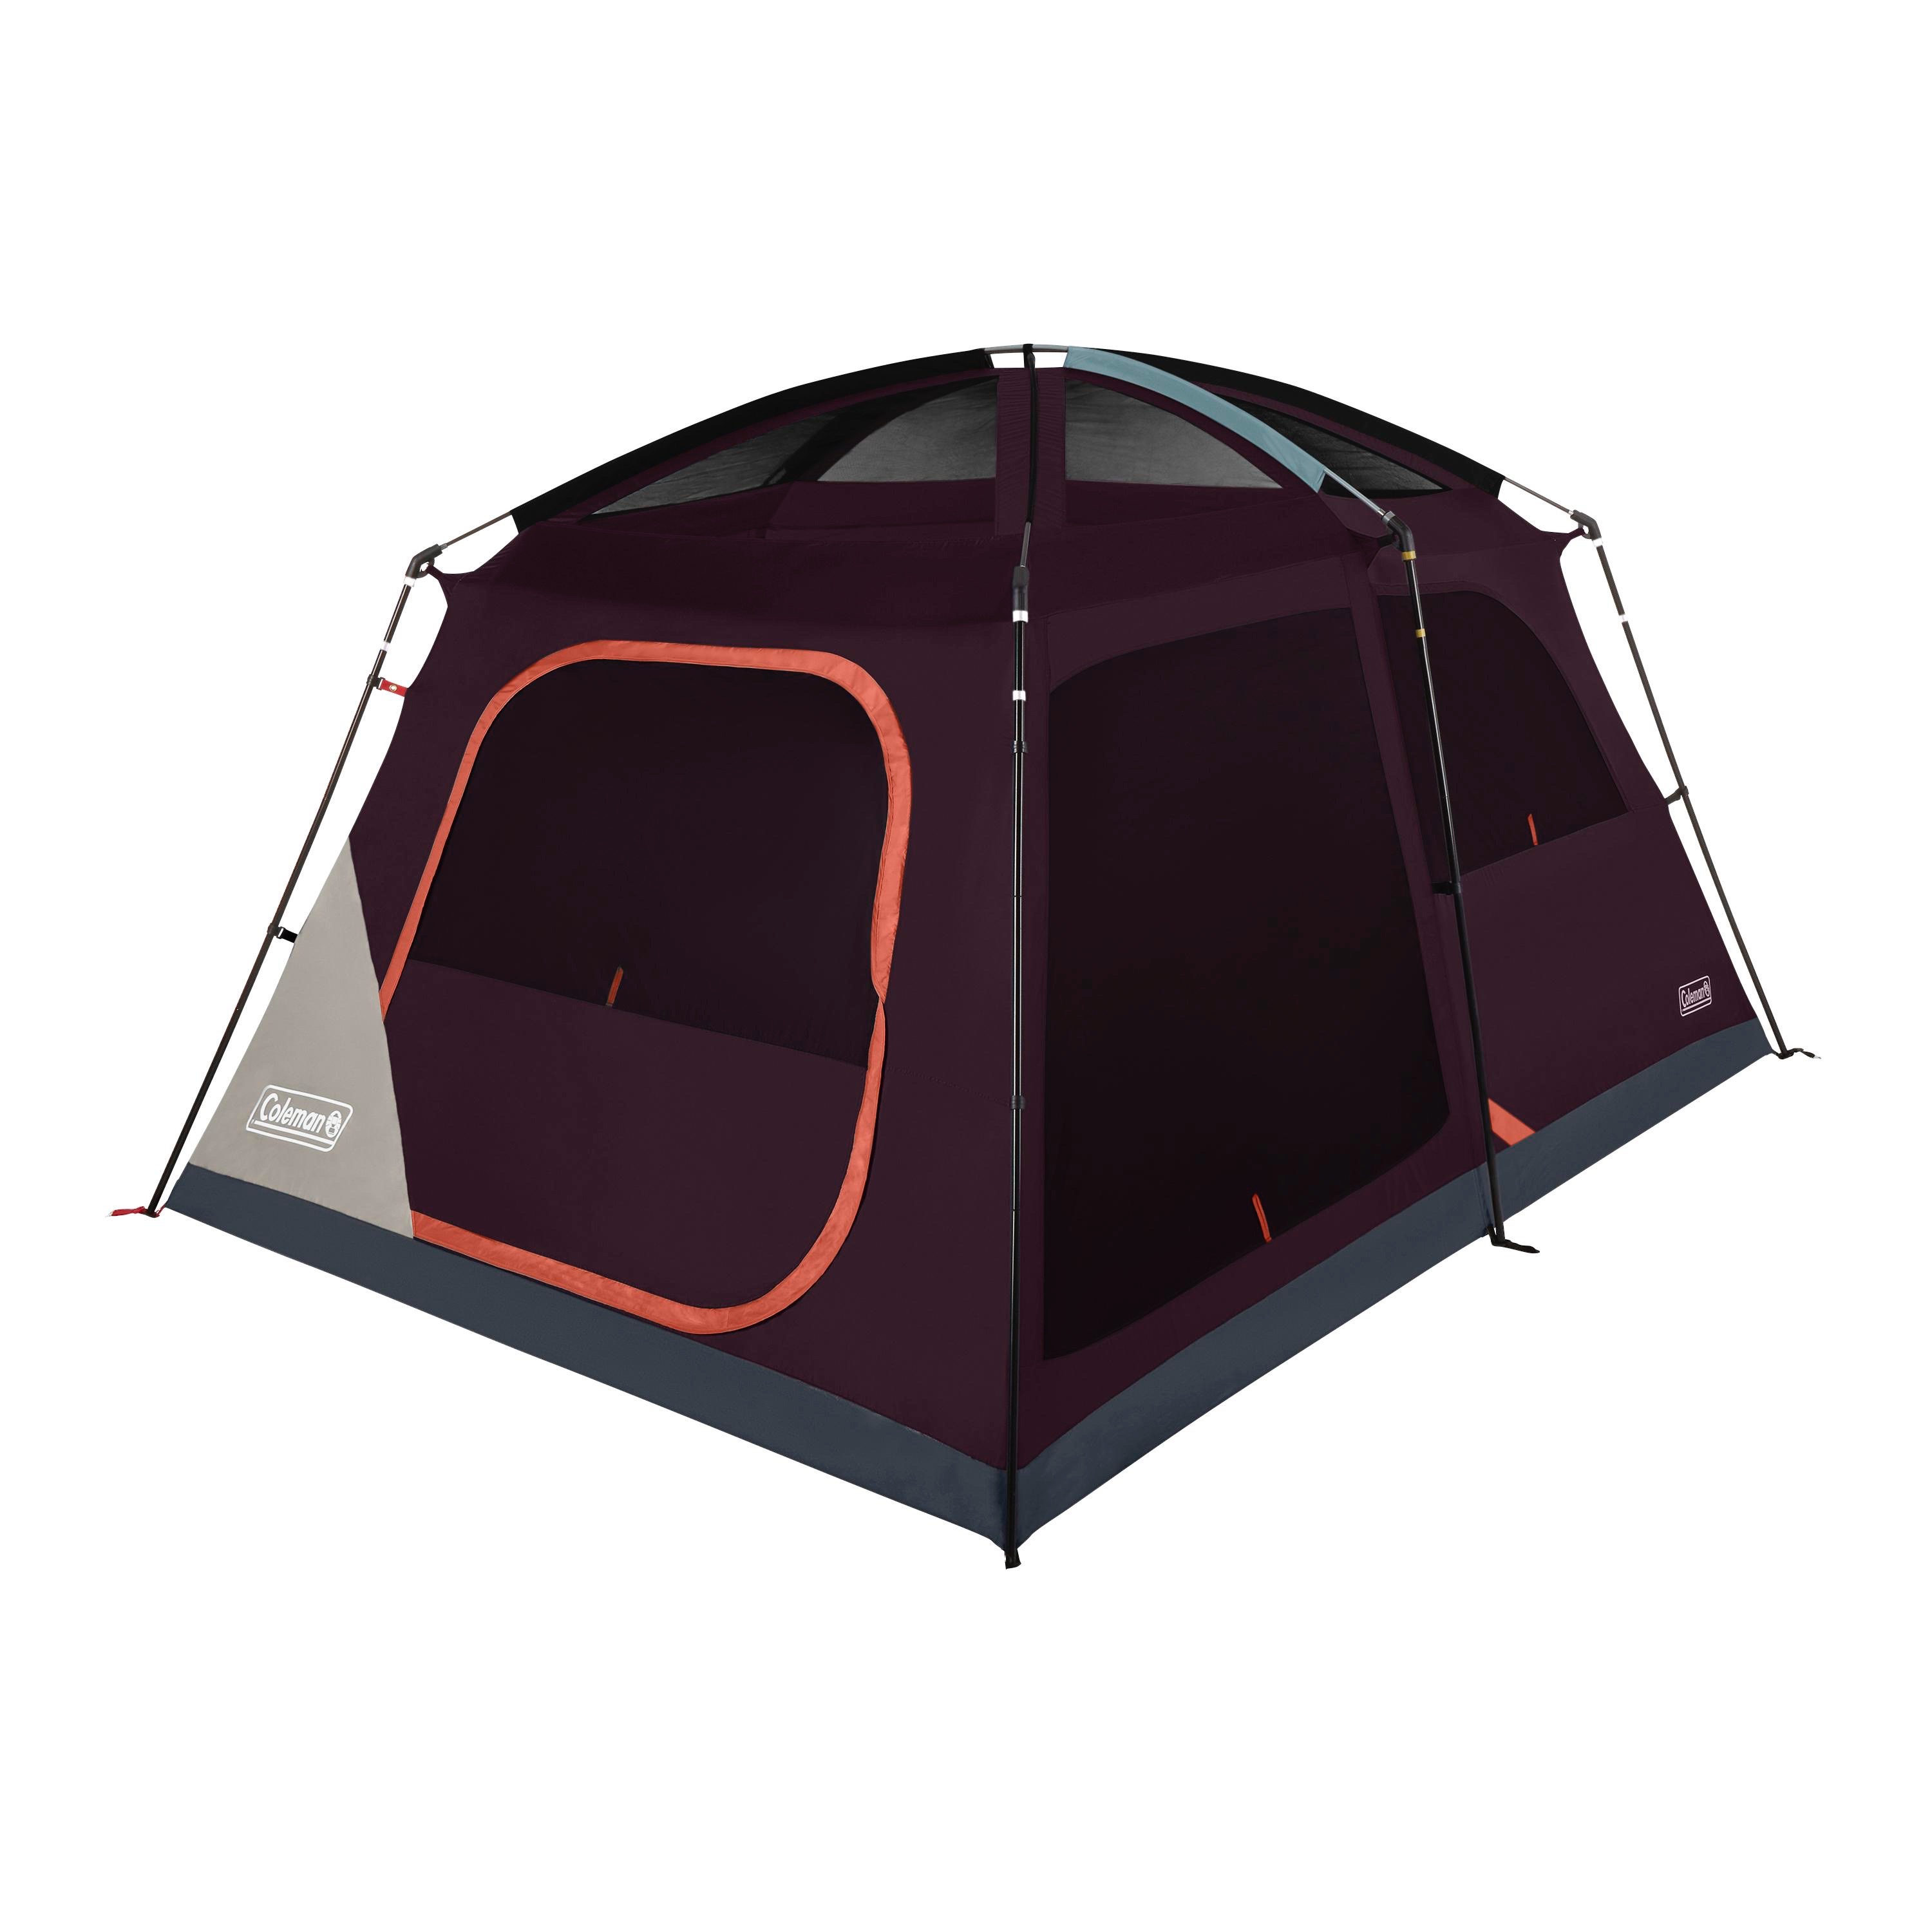 Coleman 8-Person Camping Tent - image 2 of 9